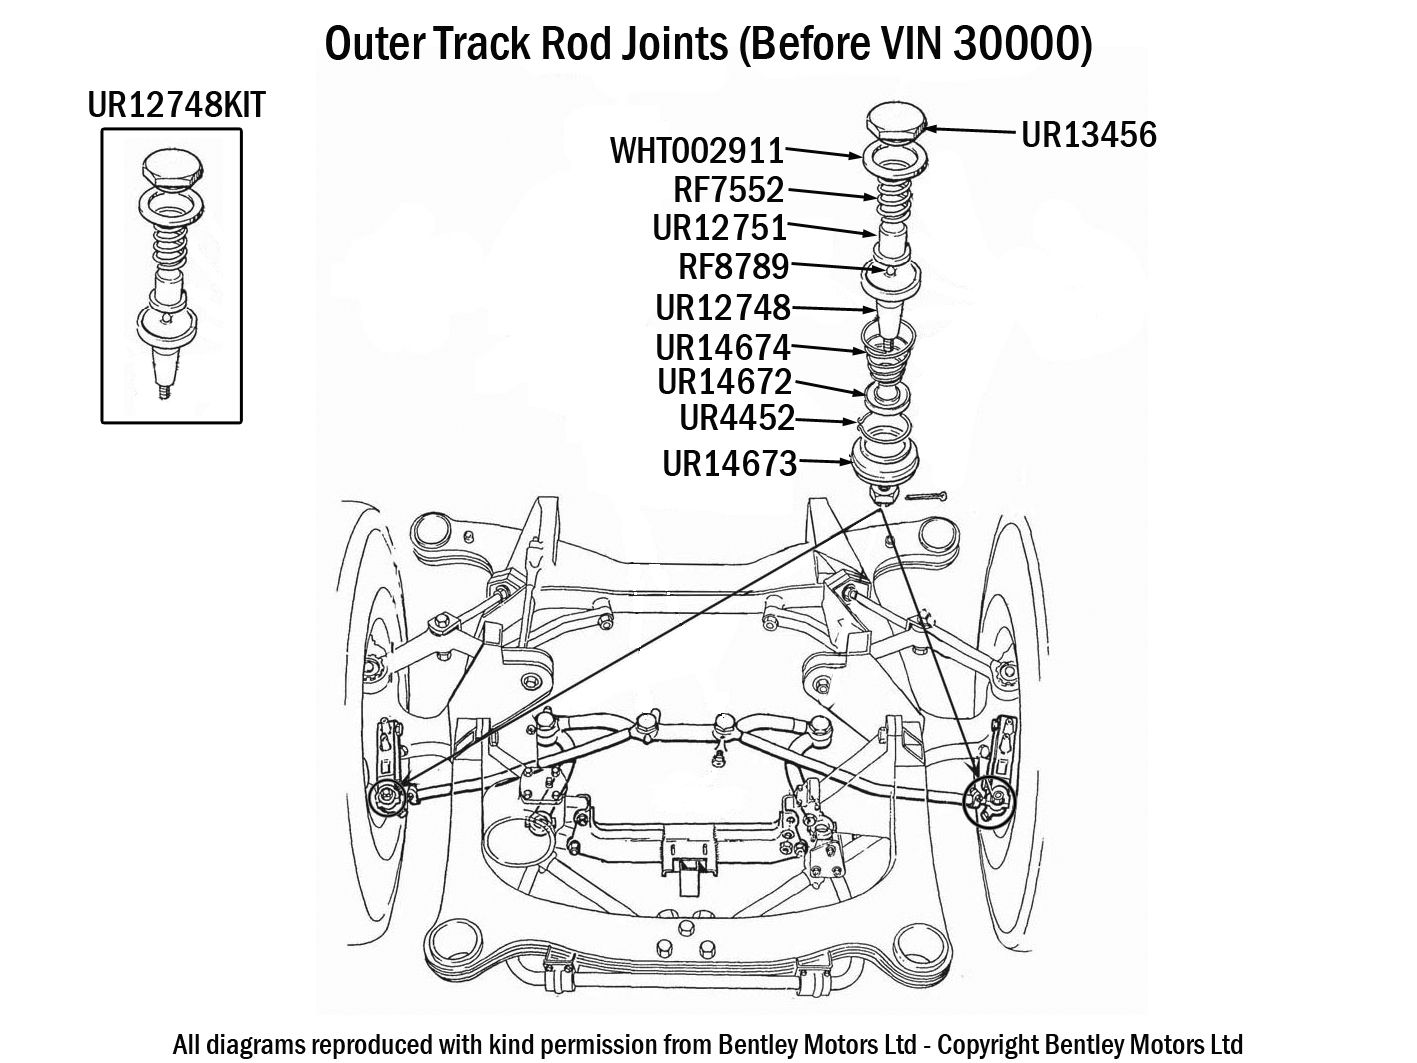 Outer Track Rod Joint